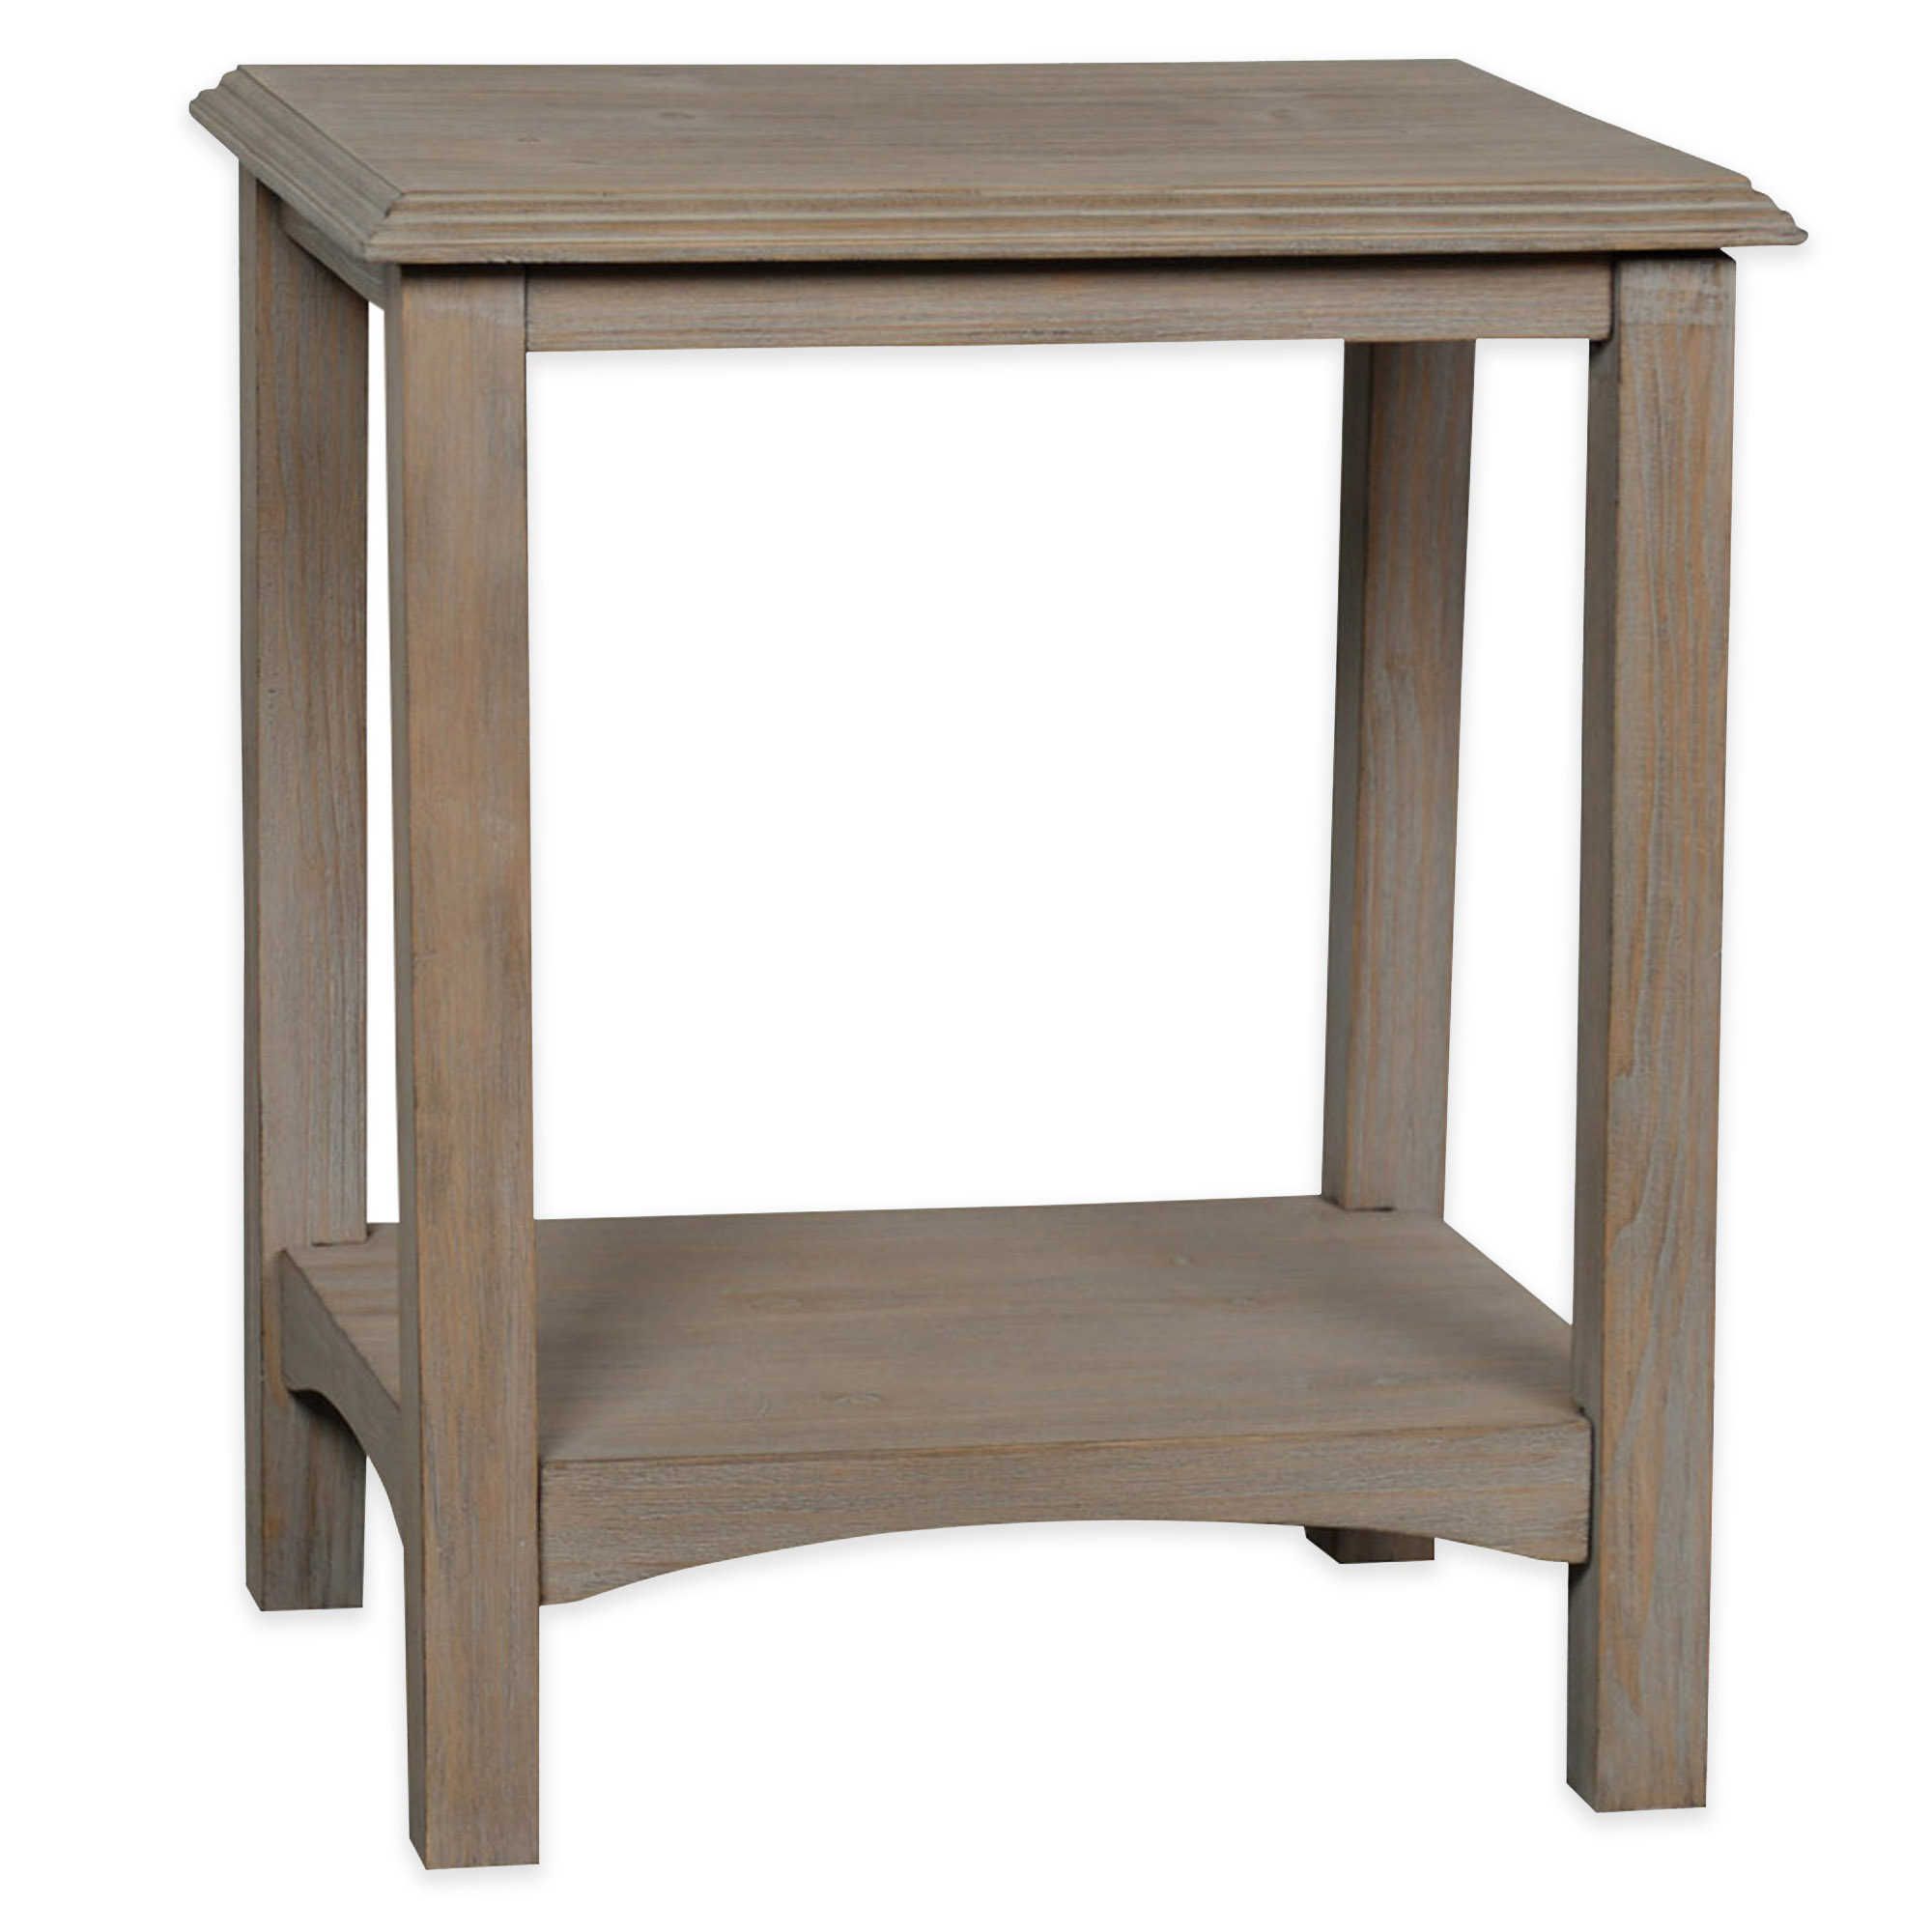 stylecraft rectangular accent table distressed grey have wood patio conversation sets clearance rattan cool bar contemporary cocktail metal and glass end tables small red lamp